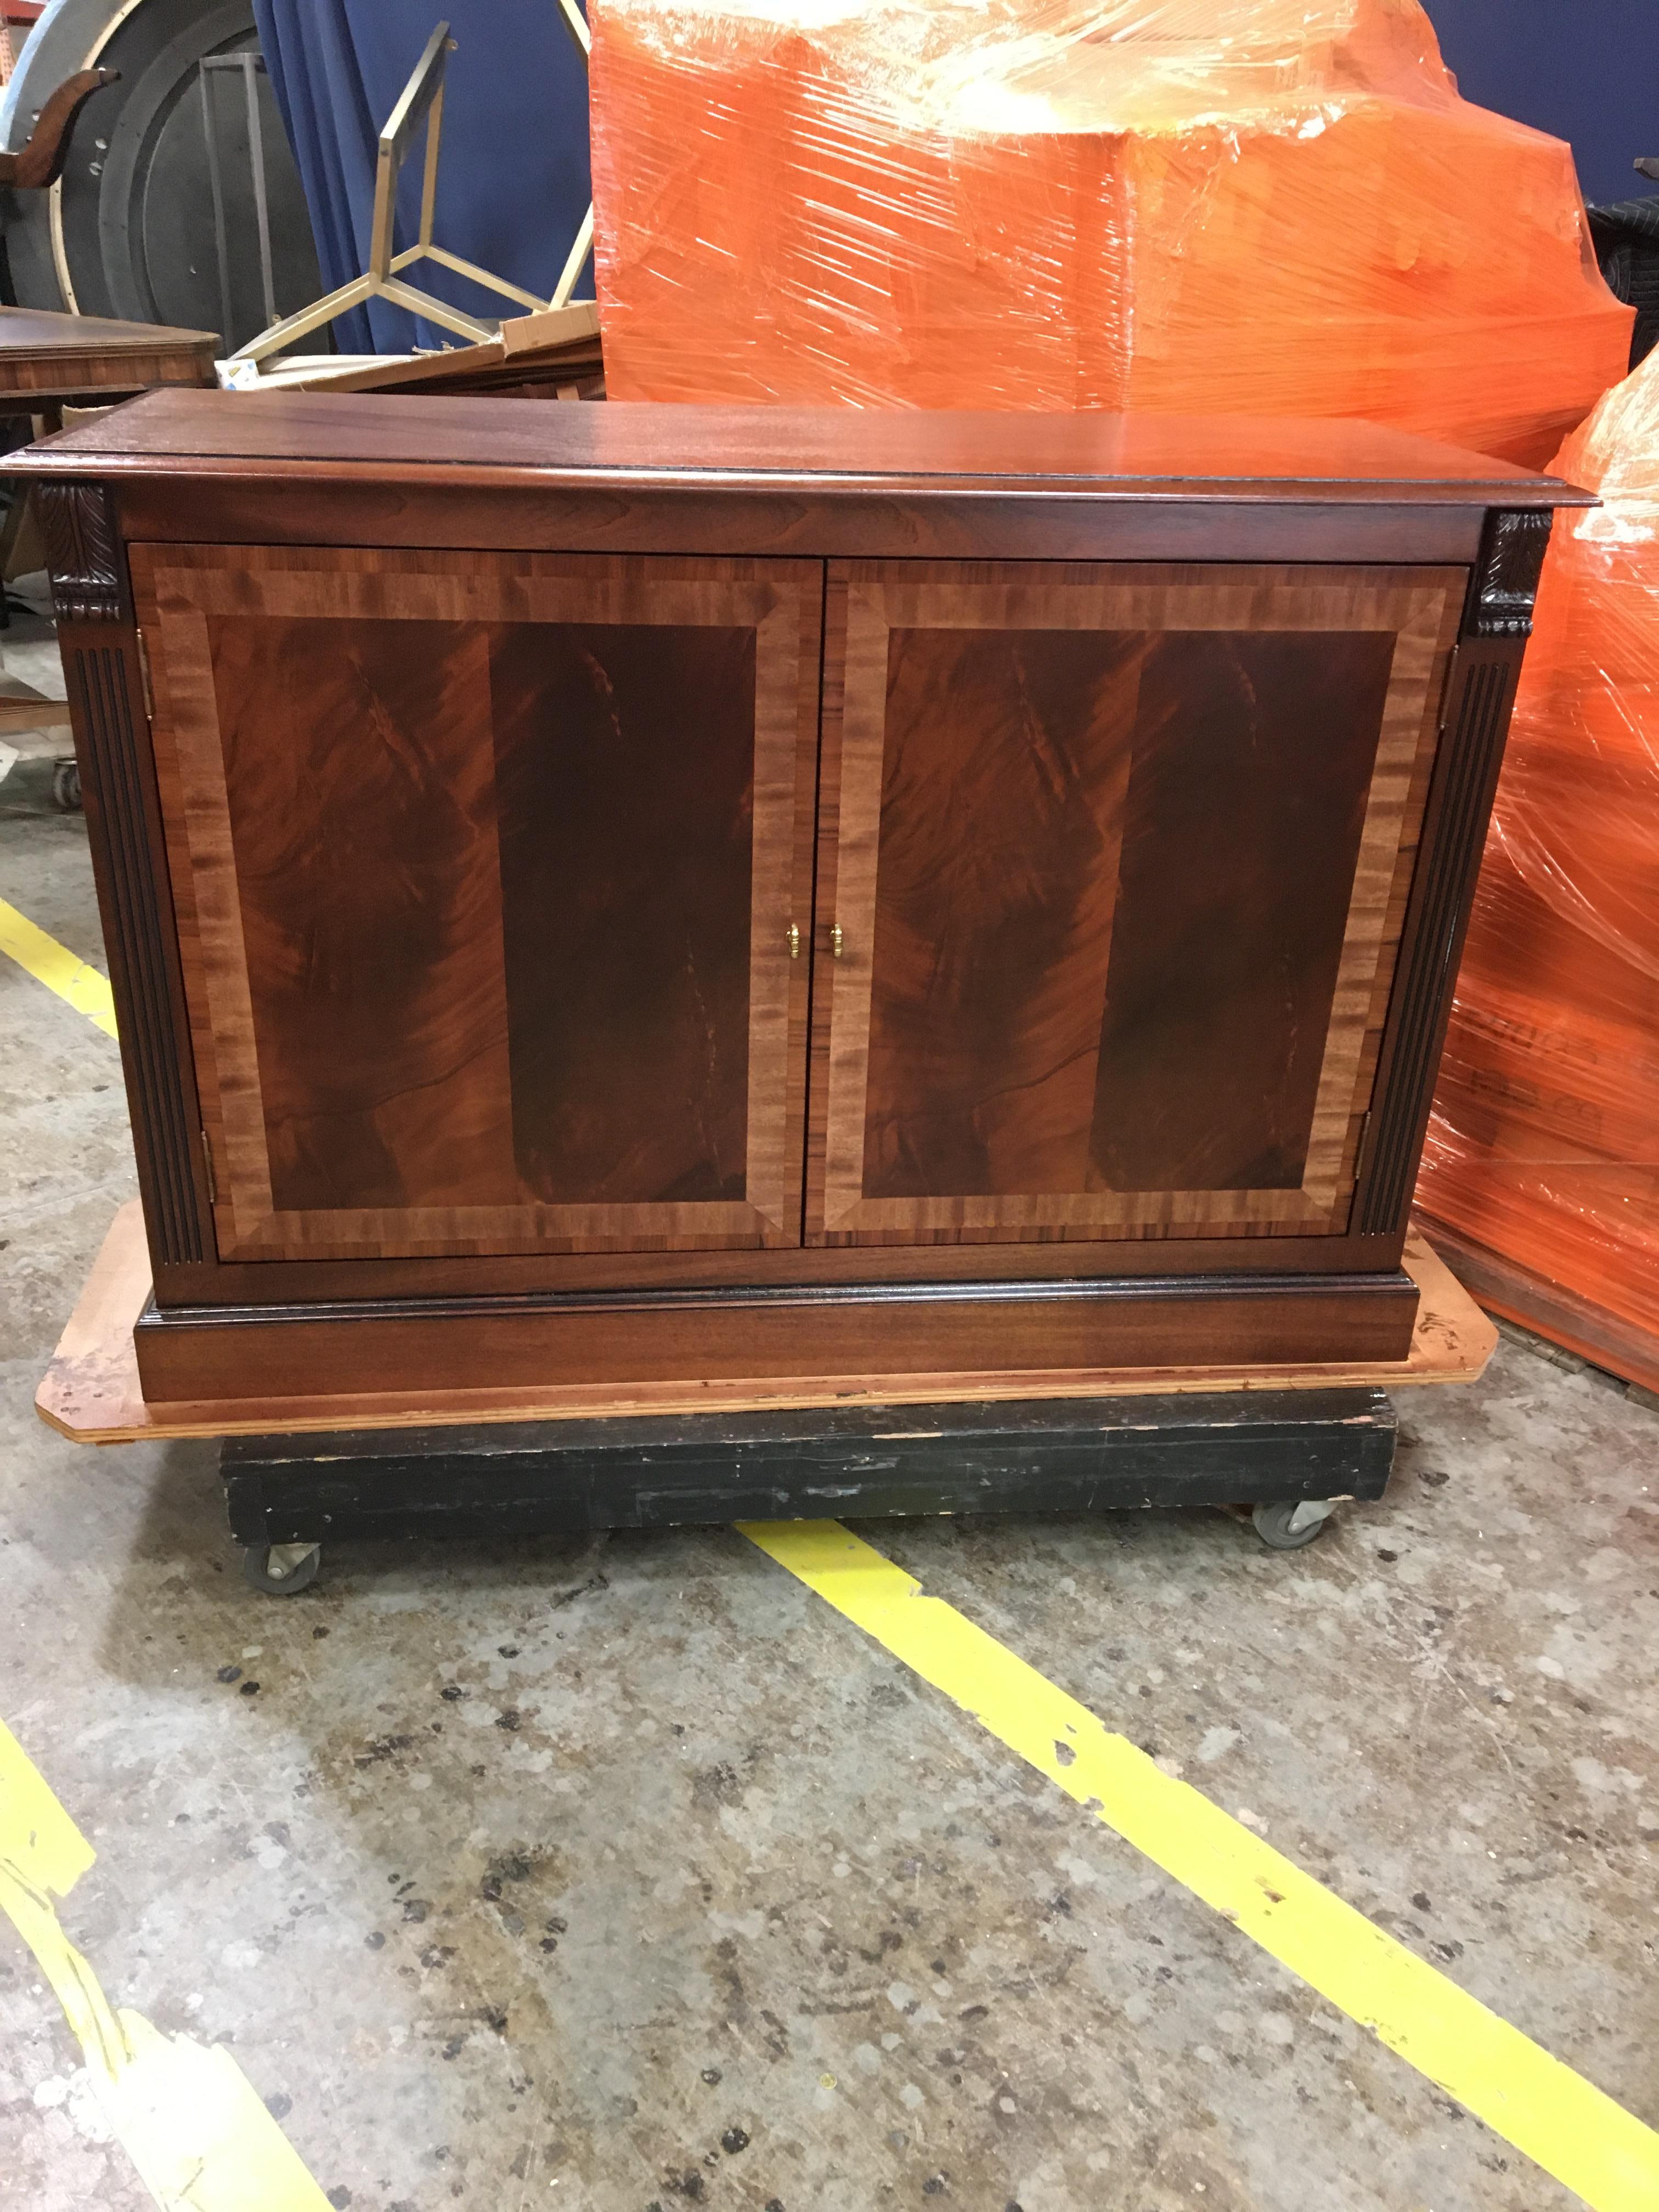 This is made-to-order traditional mahogany two-door buffet/leaf storage cabinet made in the Leighton Hall shop. It can be used as a buffet or it can be configured for dining table leaf storage. This cabinet features two doors with reverse slip